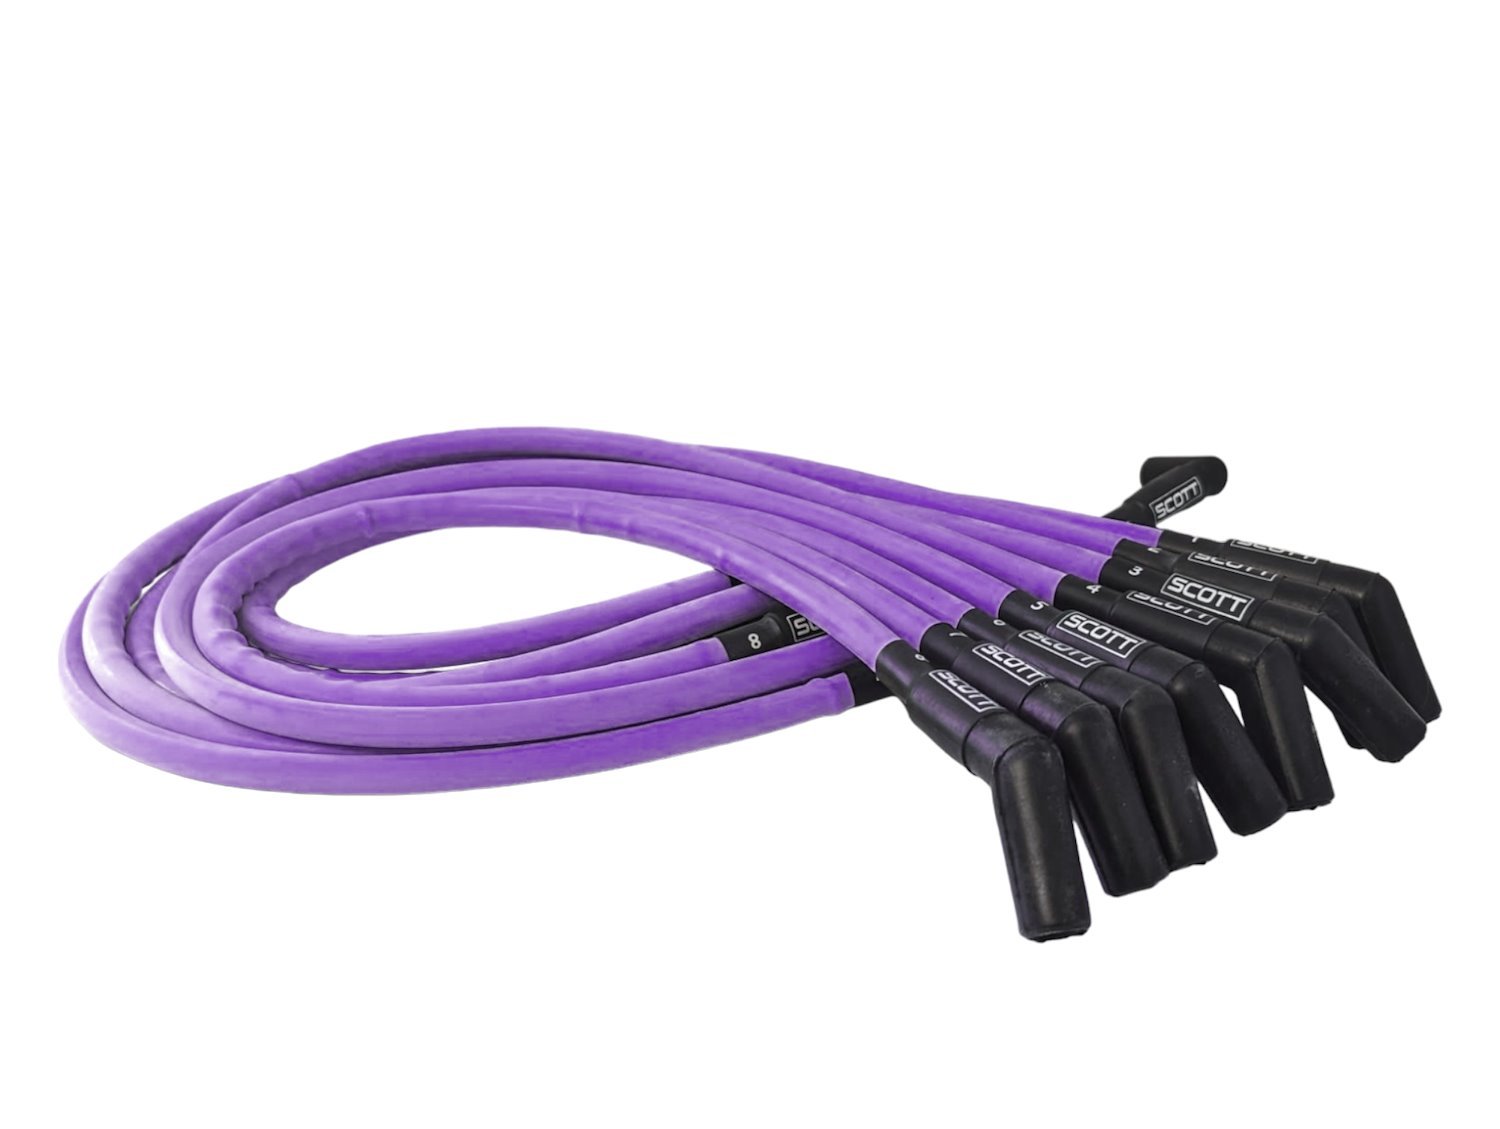 SPW300-CH-426-6 Super Mag Fiberglass-Oversleeved Spark Plug Wire Set for Small Block Ford, Over Valve Cover [Purple]